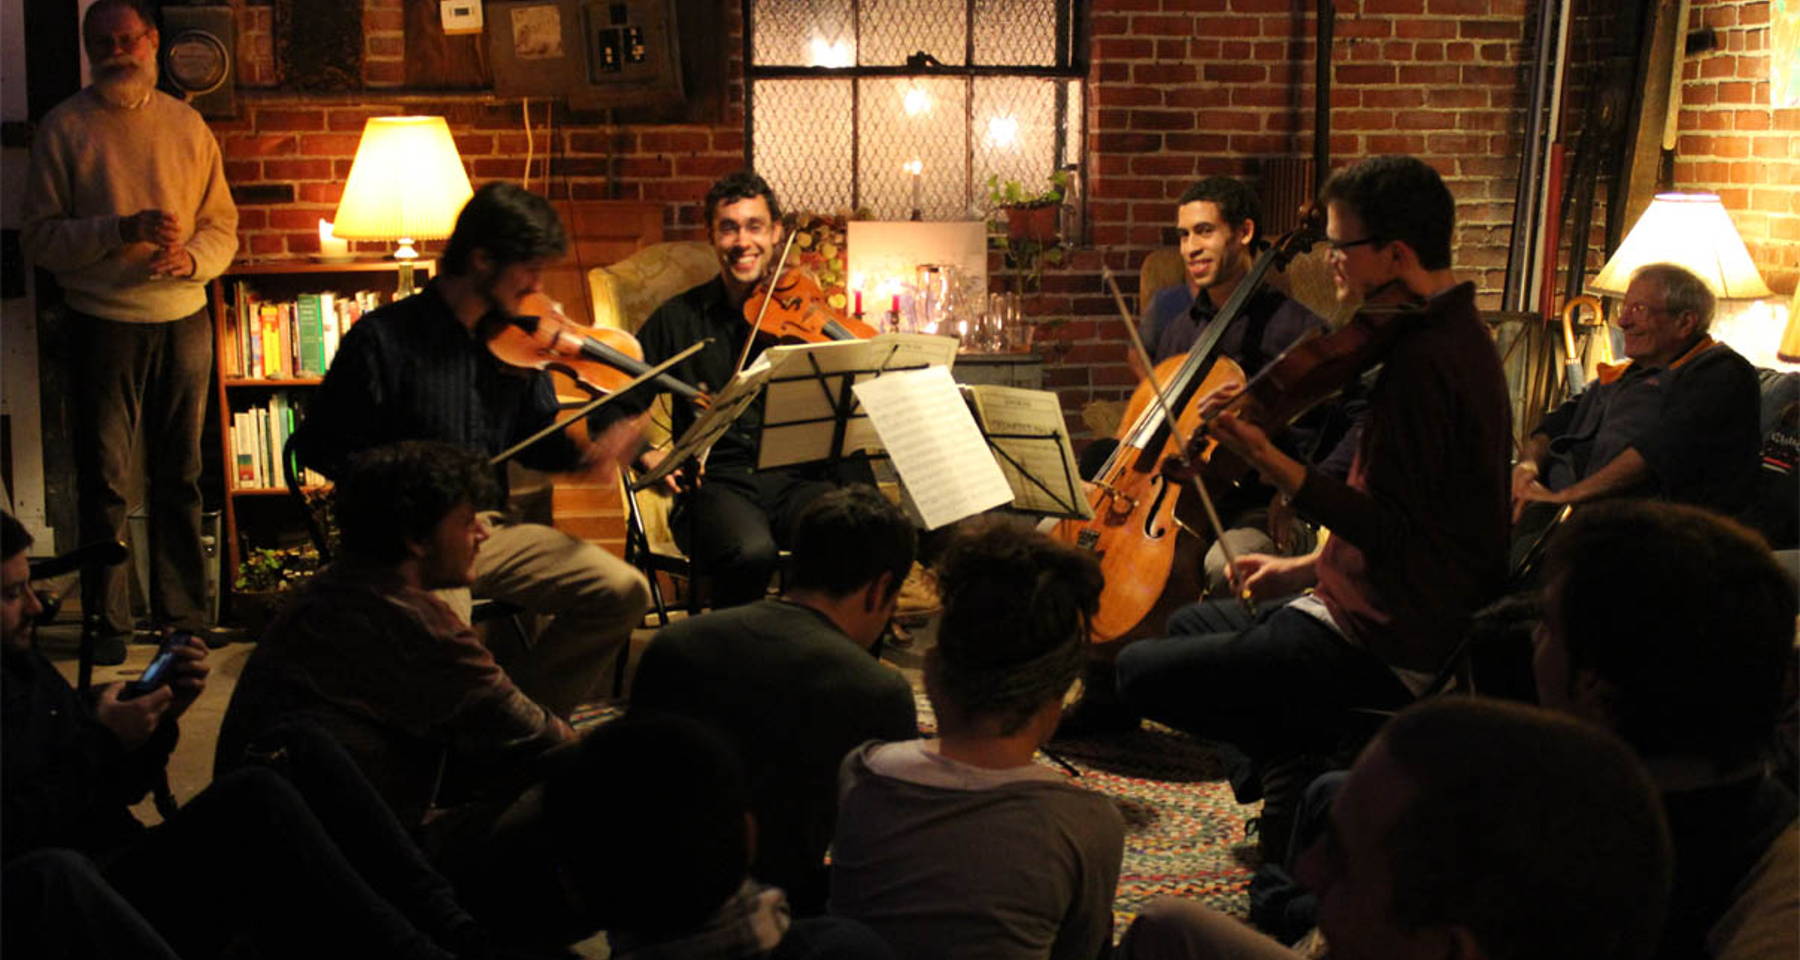 Evening of Strings in a Boerum Hill Parlour